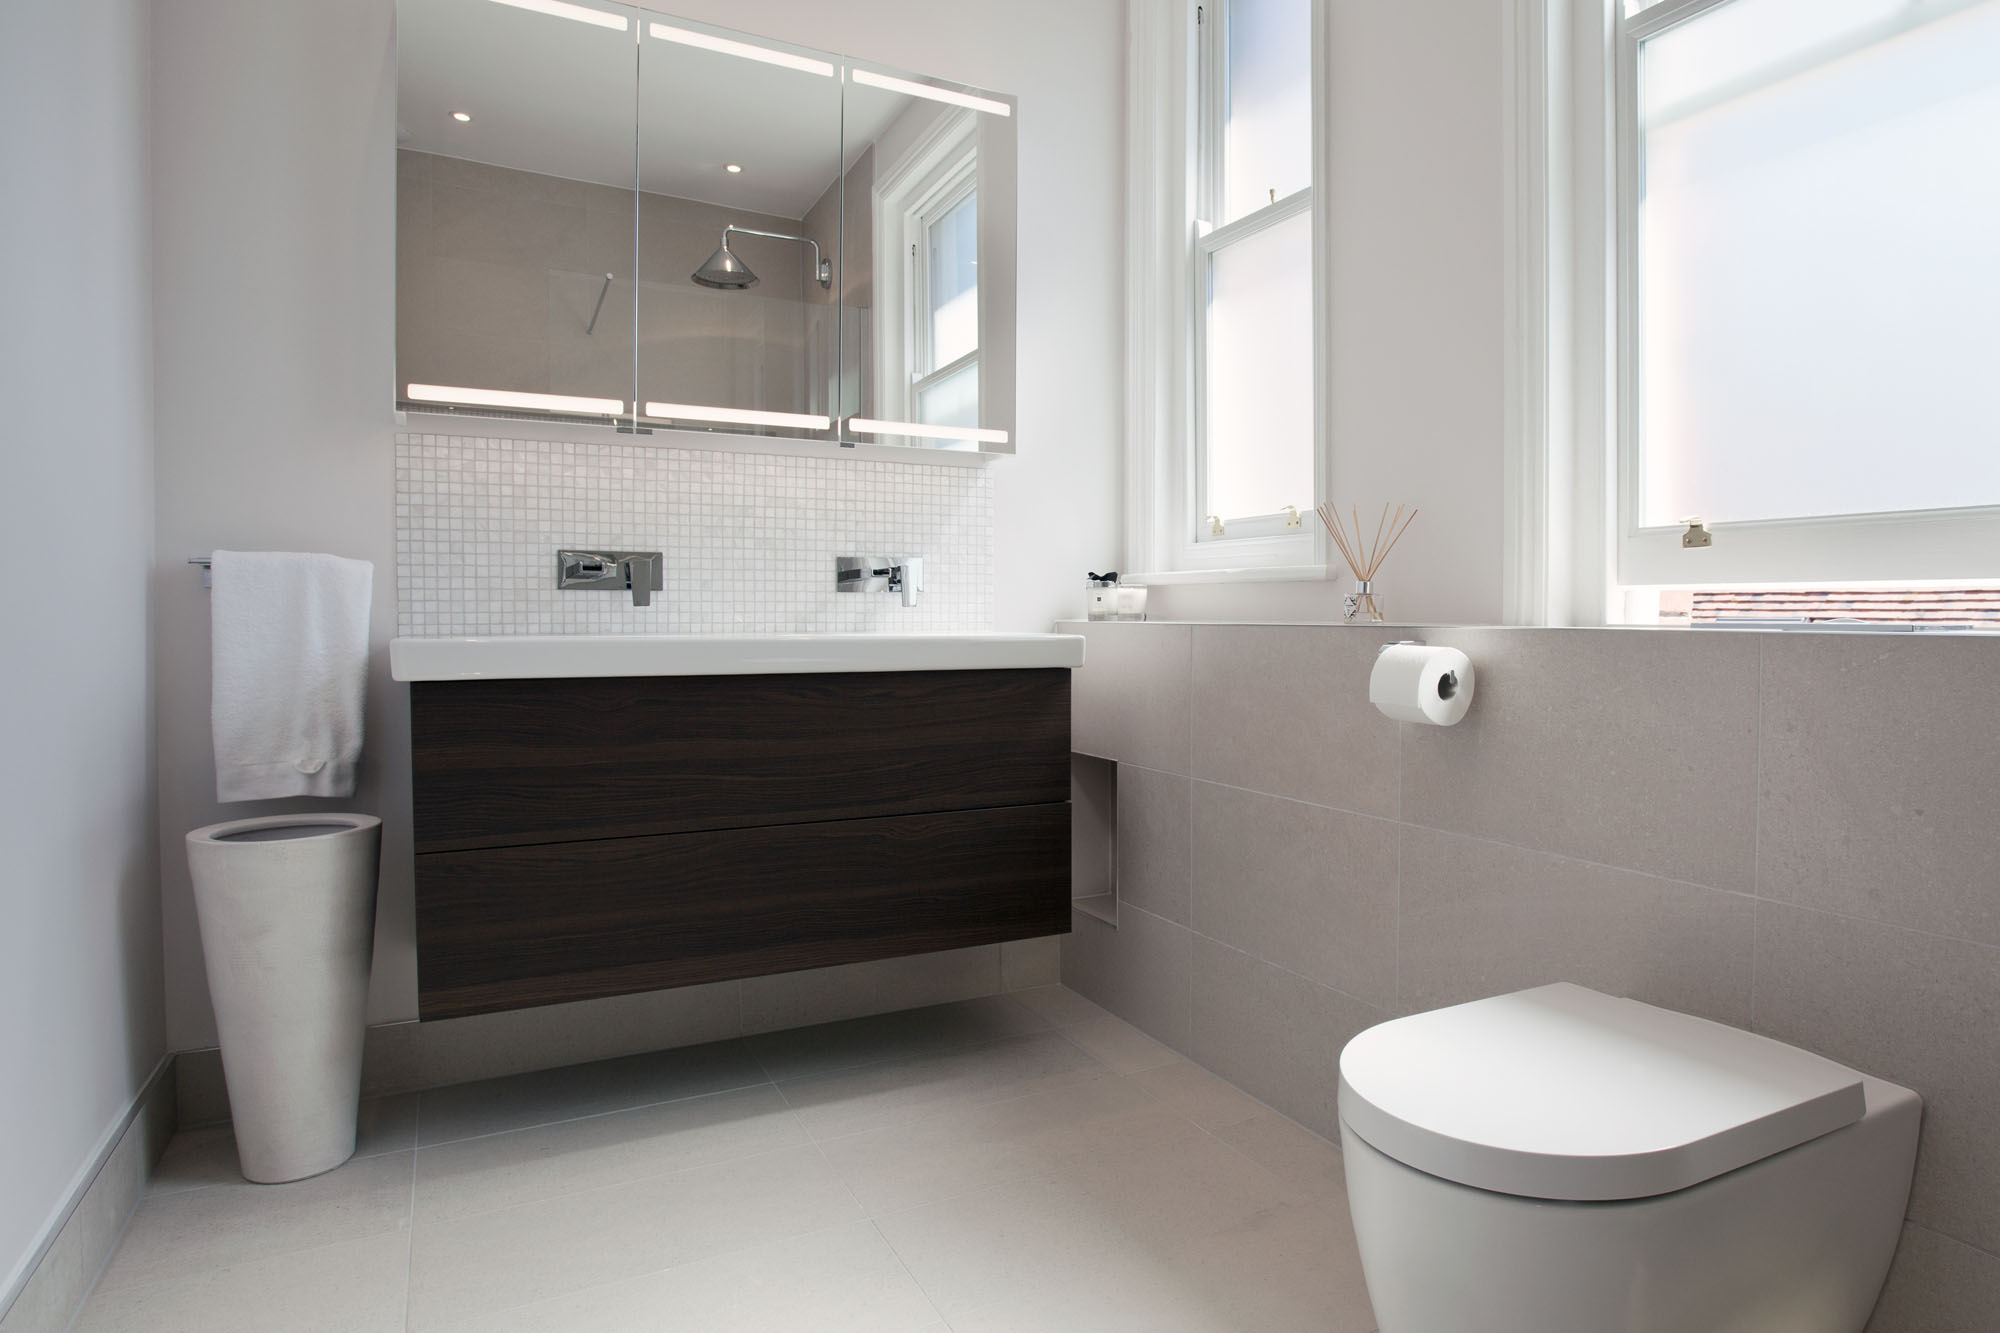 Wall Hung Toilet Timber Bathroom Vanity and Neutral Bathroom Design in Hove